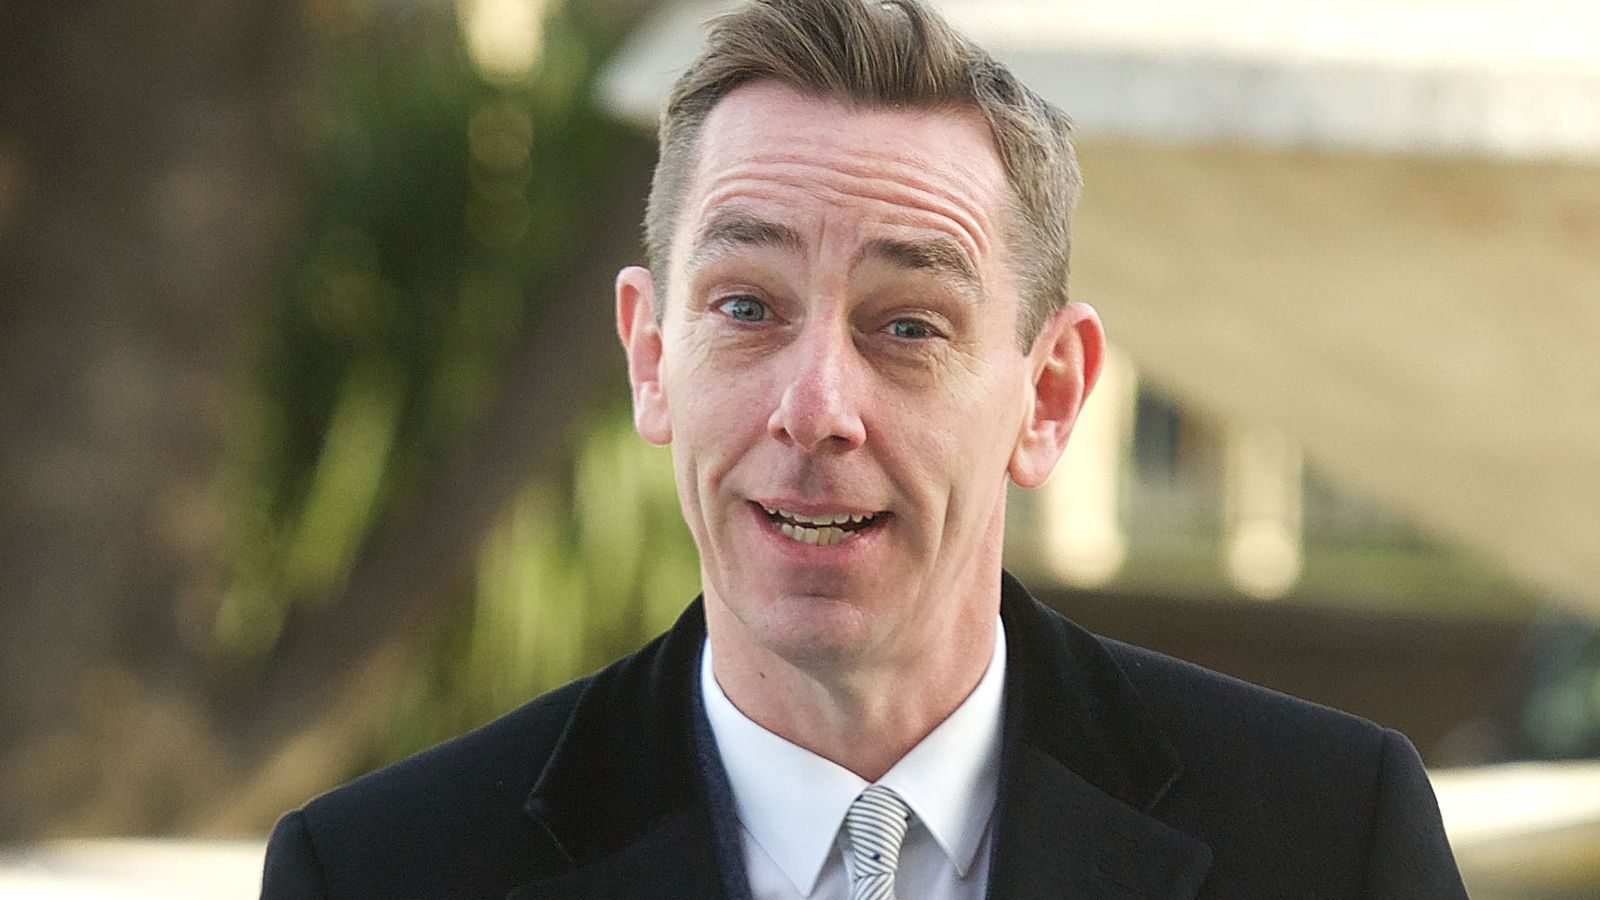 Ryan Tubridy: RTE has 'no plans' to bring back Ireland's biggest TV star after scandal over salary